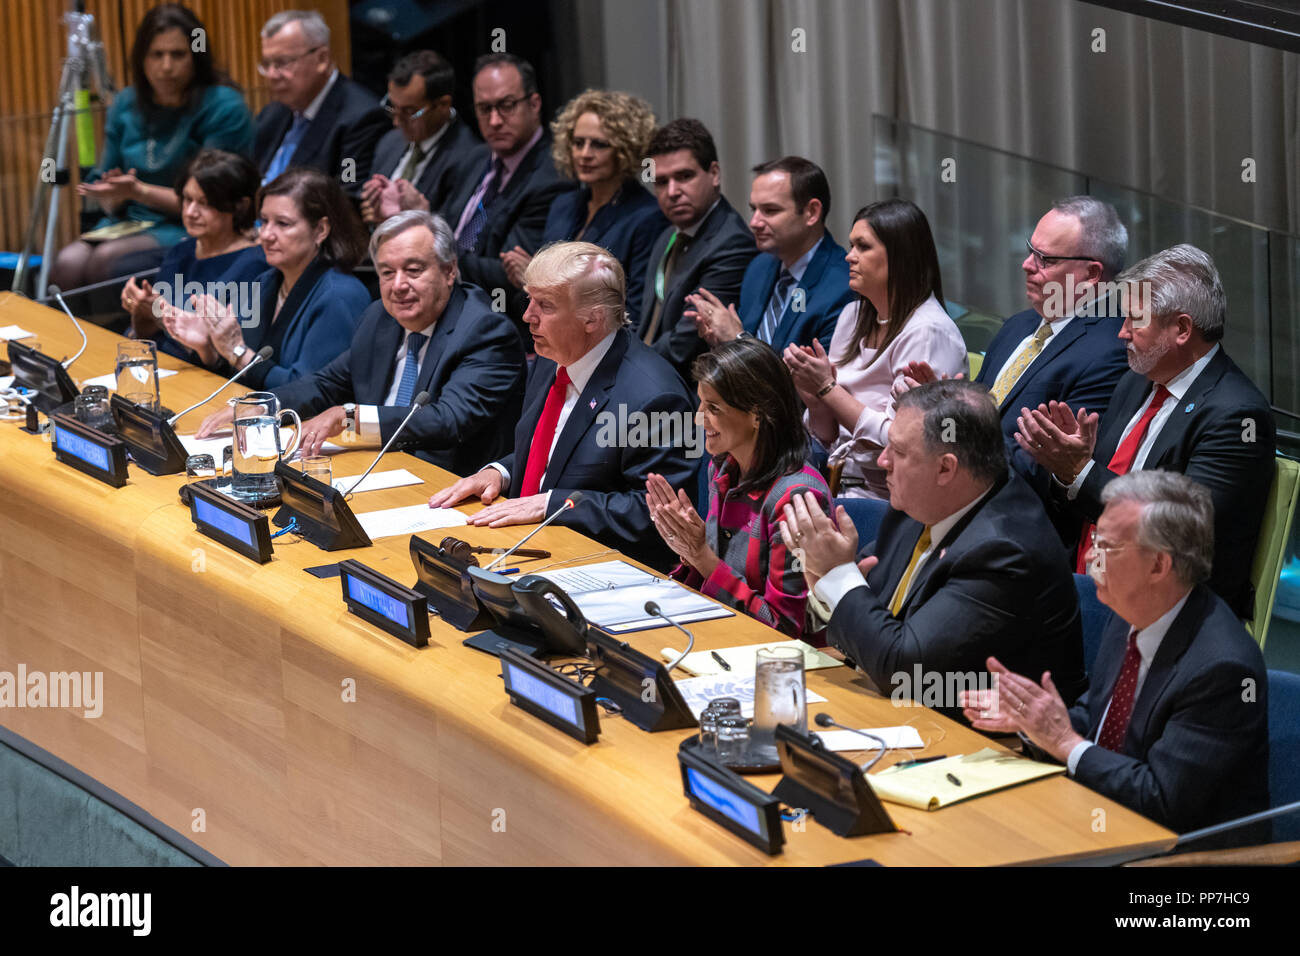 New York, USA, 24 September 2018. United Nations Secretary General António Guterres sits next to US President Donald Trump after addressing a high-level event on countering narcotics convened by the United States delegation at their headquarters in New York. Next to Trump are US Ambassador Nikki Haley, US Secretary of State Mike Pompeo and US National Security Adviser John Bolton. Trump presented his Global Call to Action on the World Drug Problem. Photo by Enrique Shore Credit: Enrique Shore/Alamy Live News Stock Photo